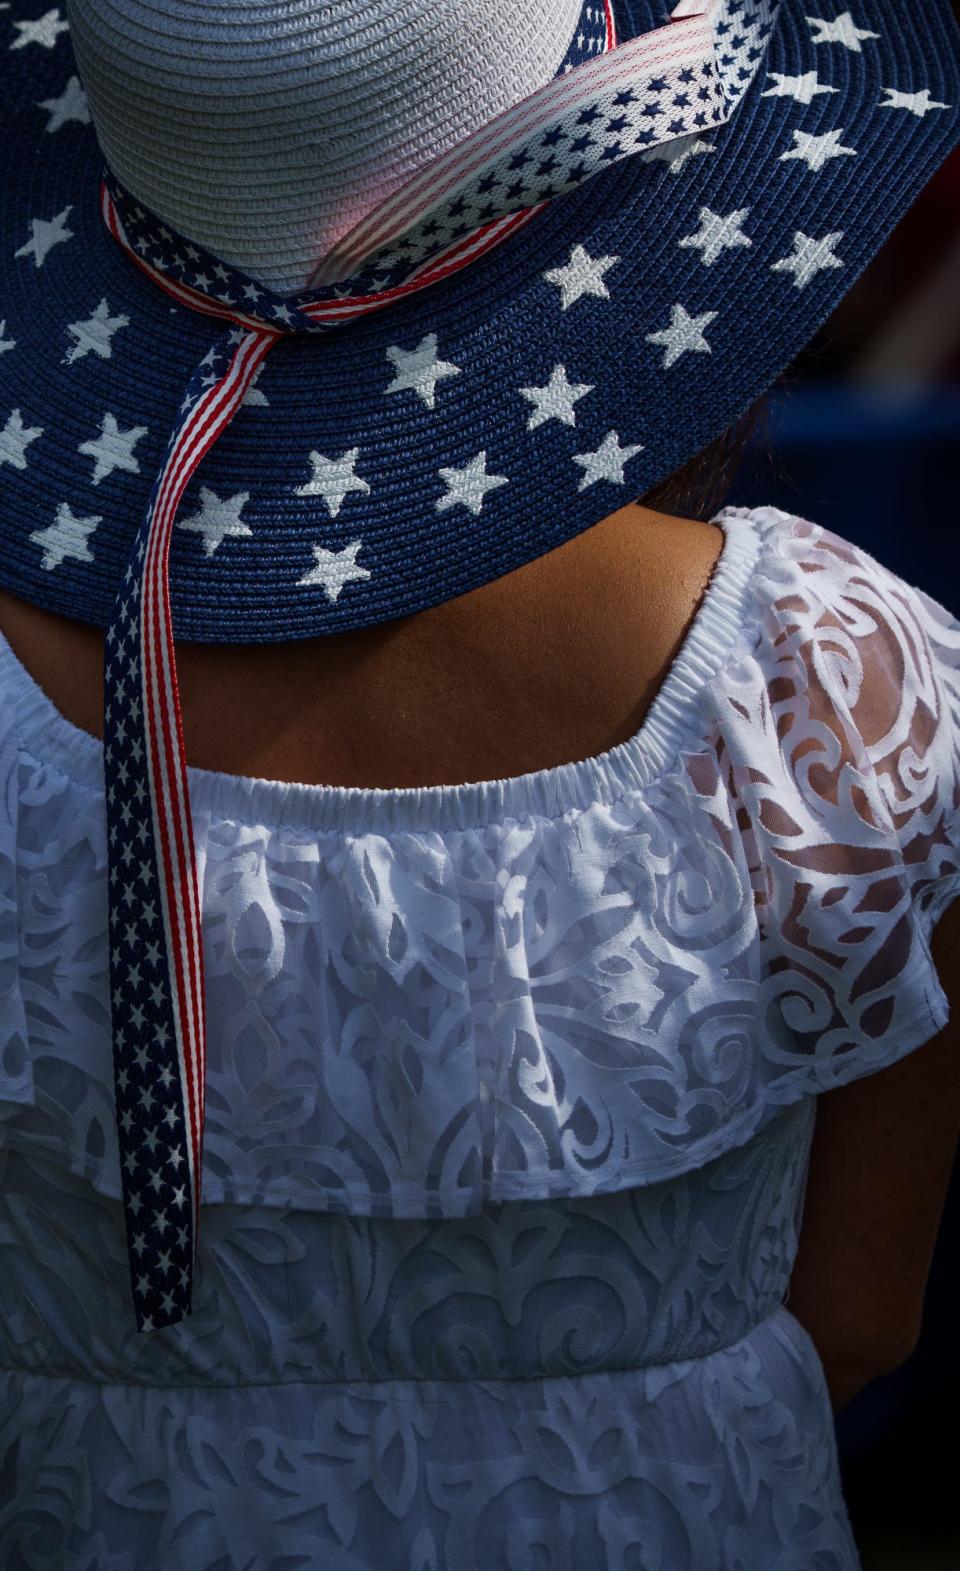 A woman in attendance Friday, July 1, 2022, during a naturalization ceremony at the Benjamin Harrison Presidential Site, wheres an American flag themed hat. 